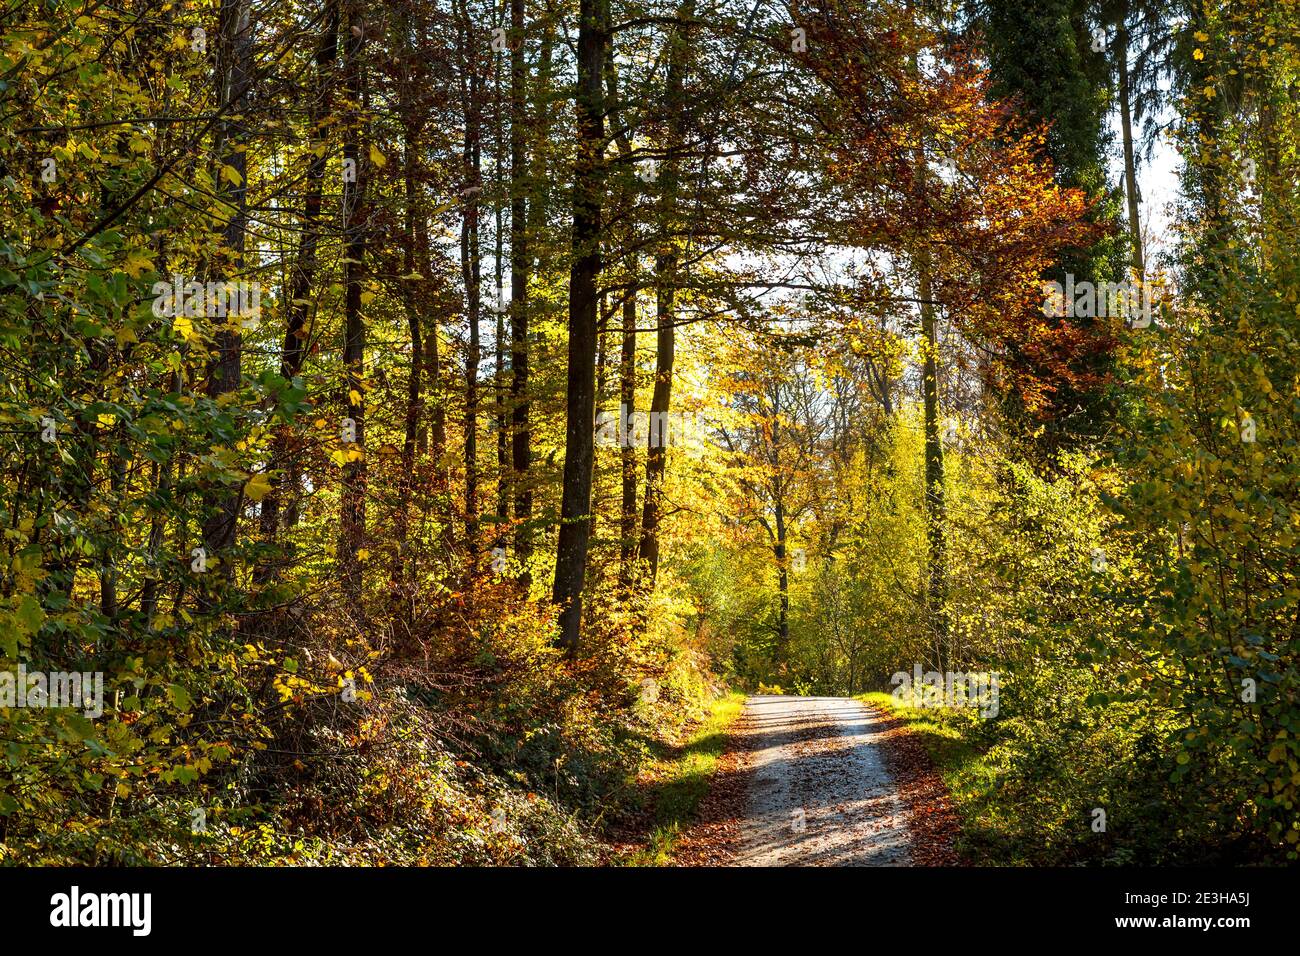 Country road leading through colourful autumn forest landscape Stock Photo